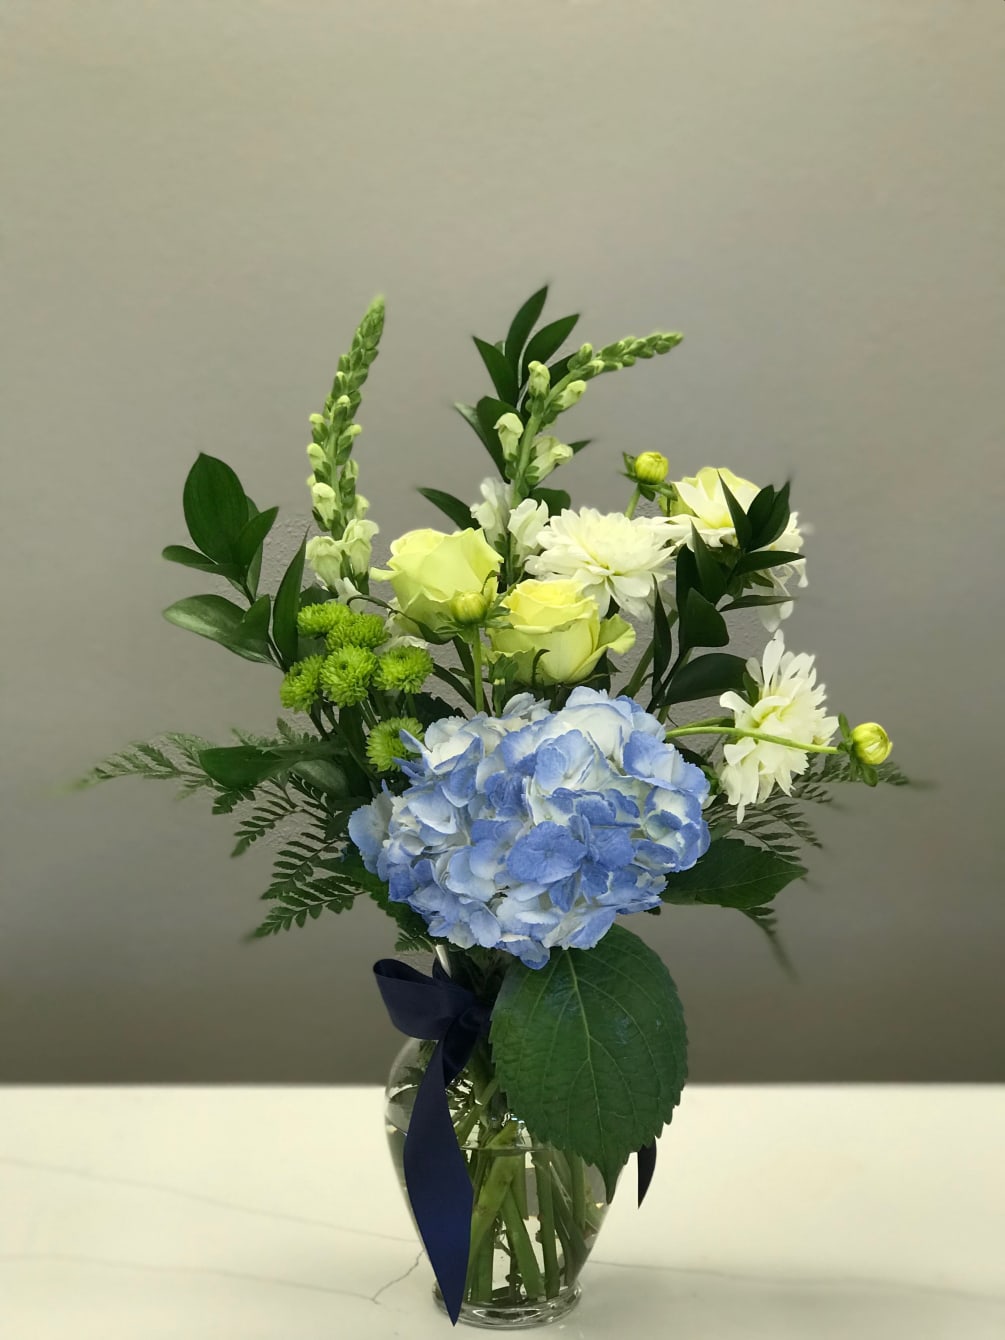 Shades of green and ivory float above a center stage blue hydrangea.